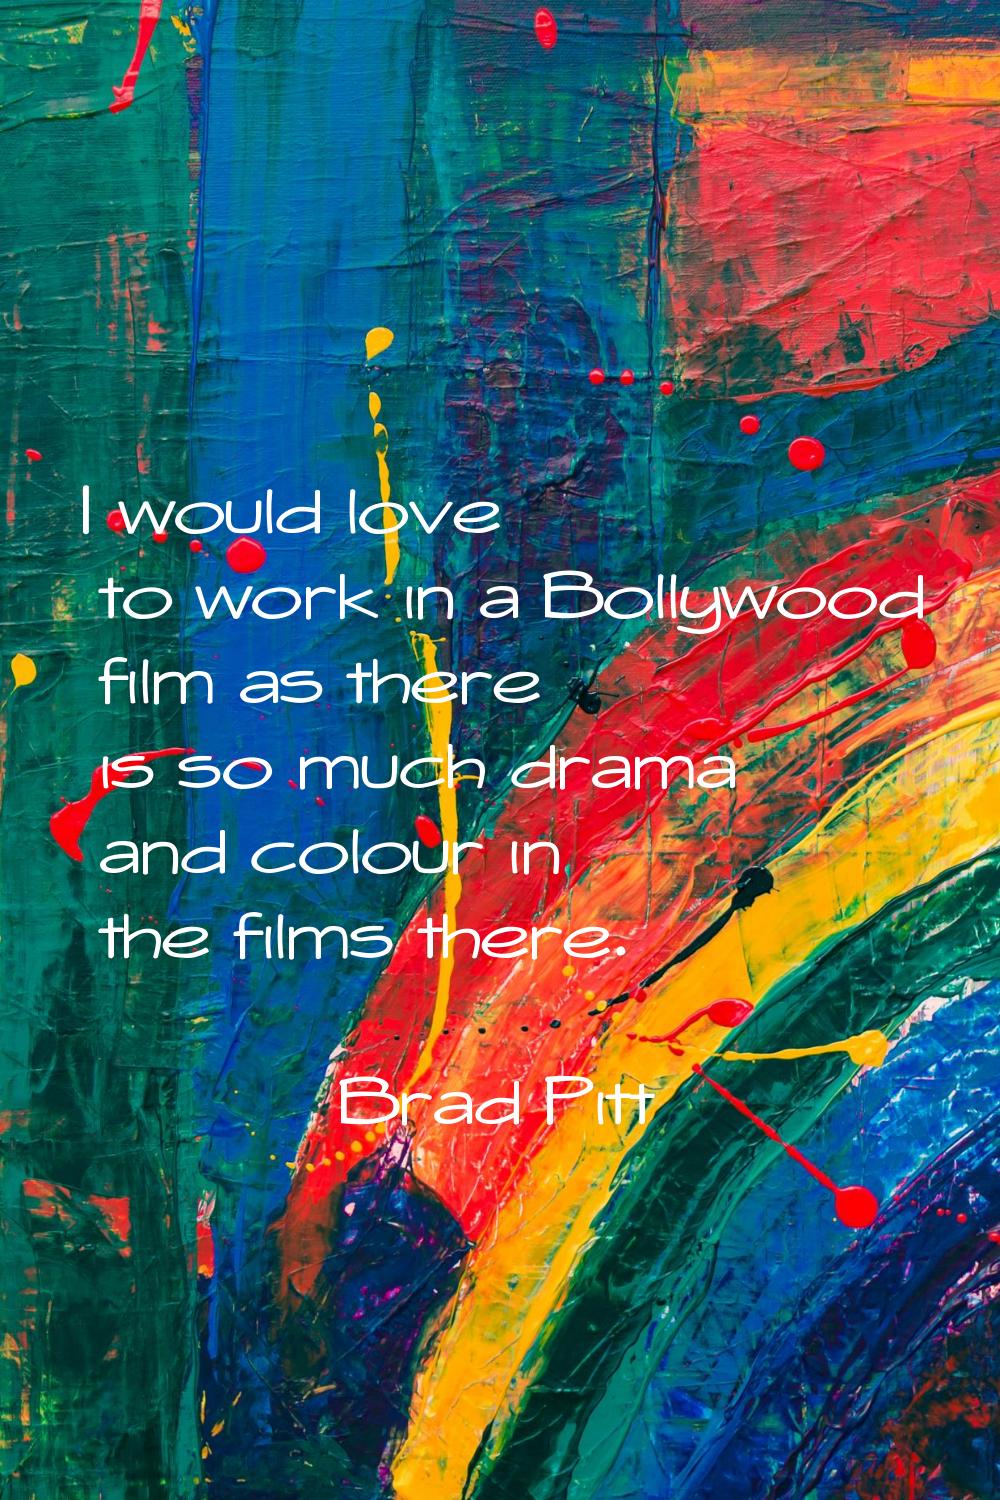 I would love to work in a Bollywood film as there is so much drama and colour in the films there.